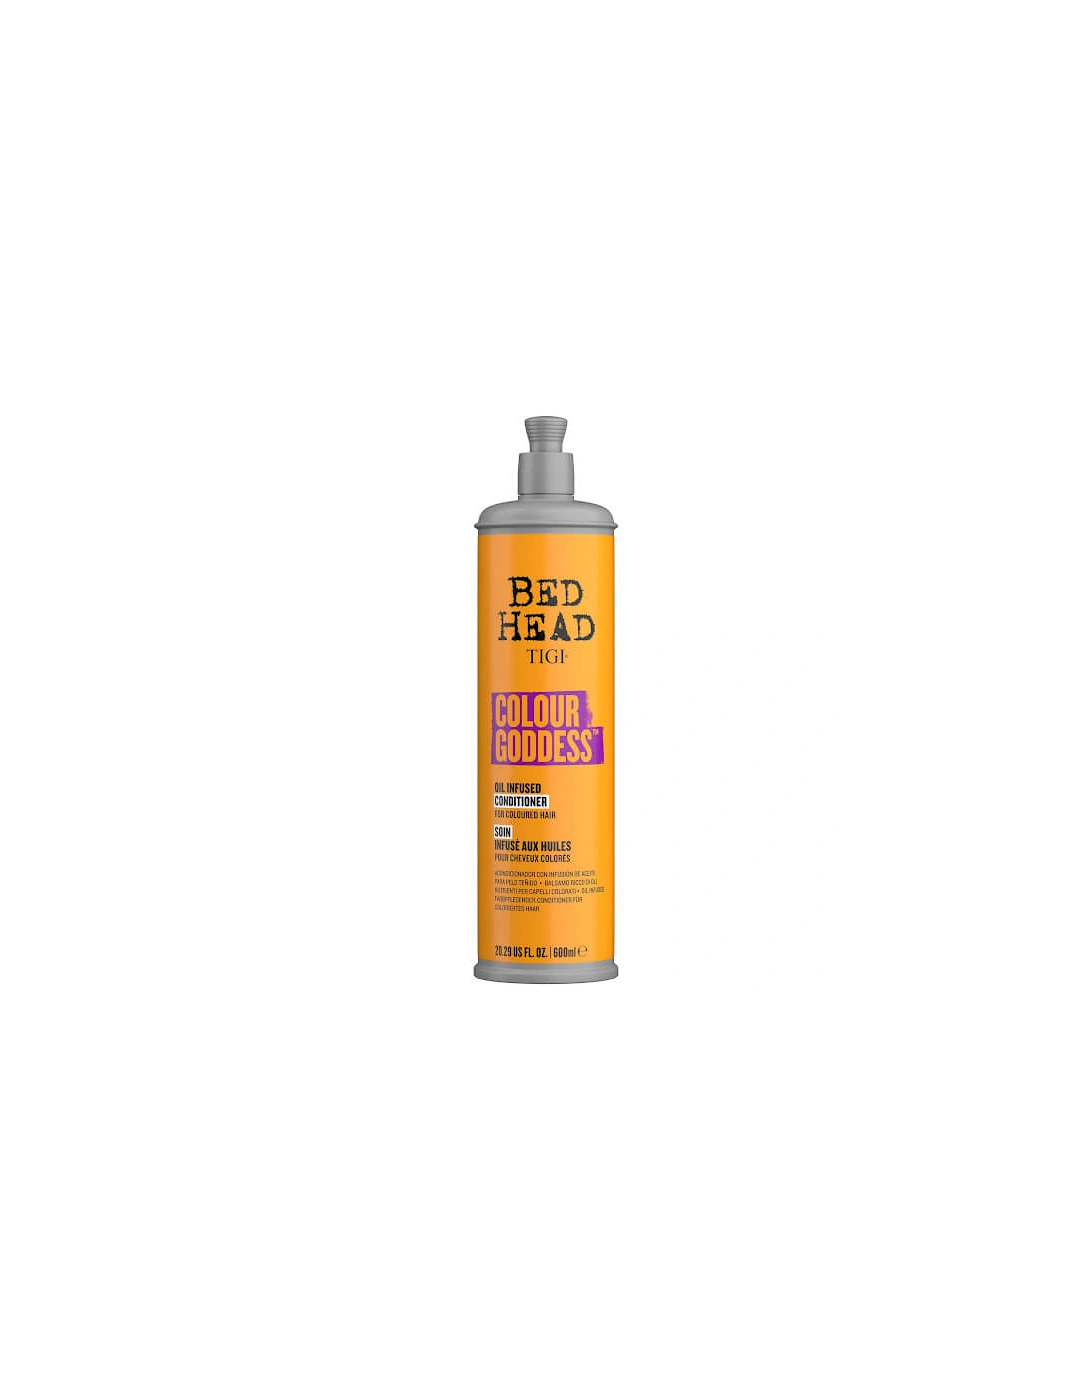 Bed Head by Colour Goddess Conditioner for Coloured Hair 600ml, 2 of 1